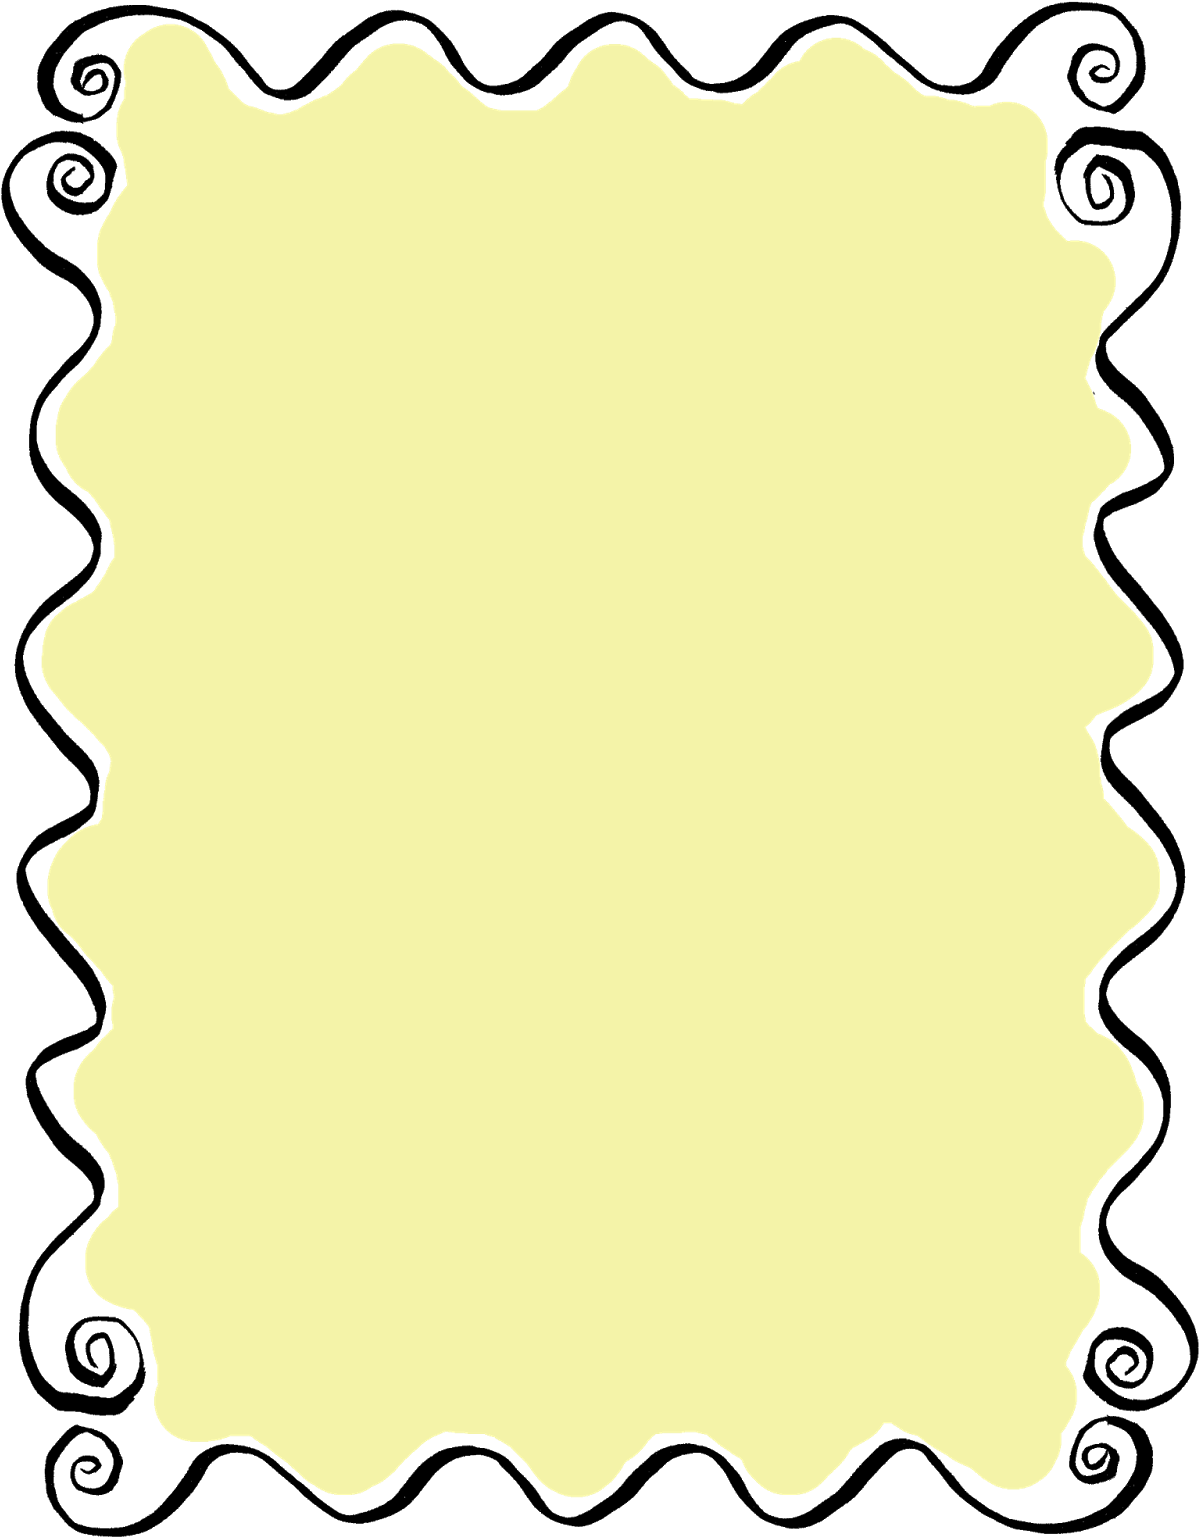 A Yellow Rectangle With Black Border